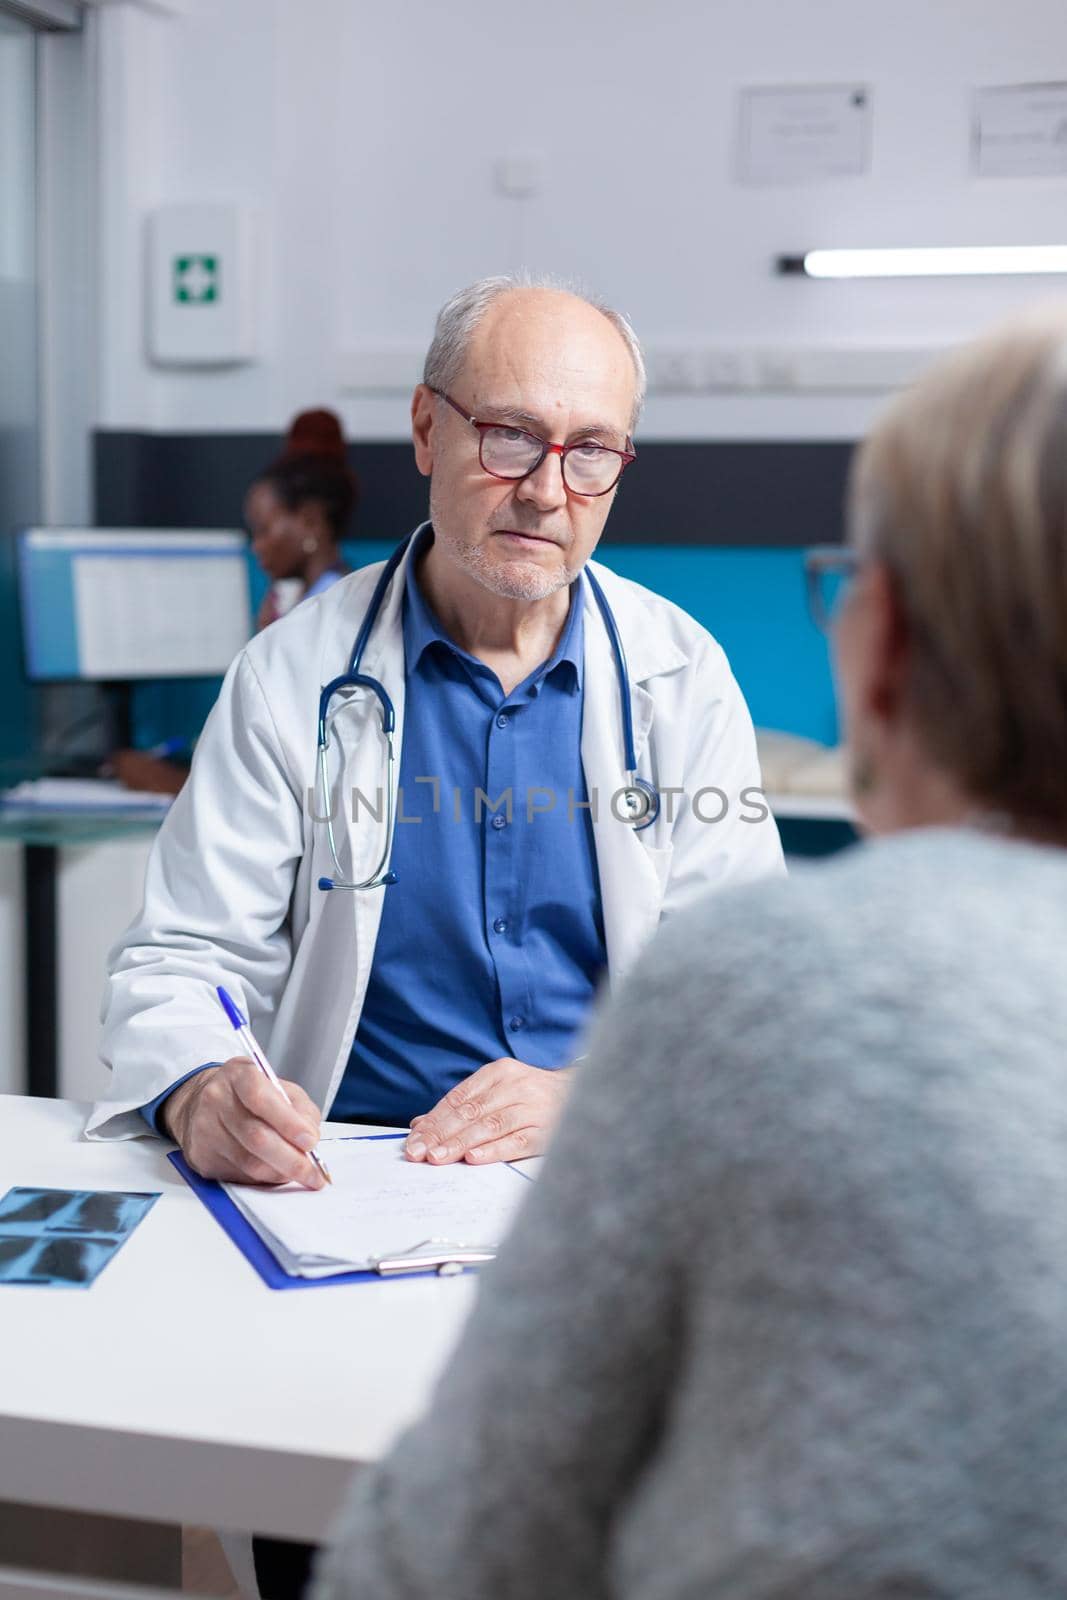 Medic signing checkup files to give prescription treatment to sick patient. Specialist writing diagnosis on clipboard papers, after doing medical consultation at checkup appointment.